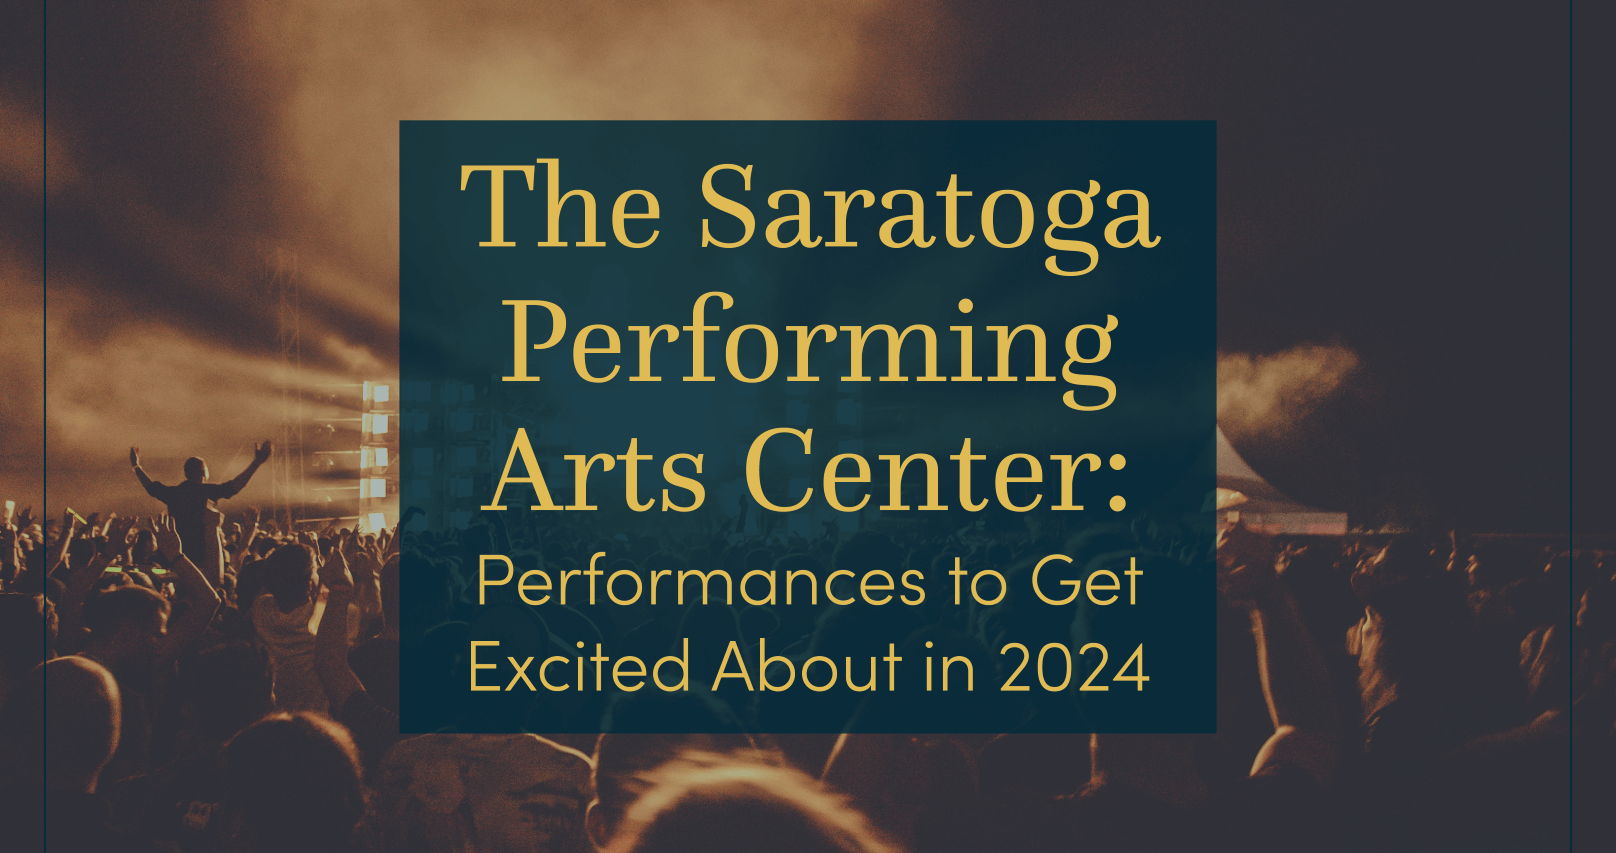 The Saratoga Performing Arts Center: Performances to Get Excited About in 2024